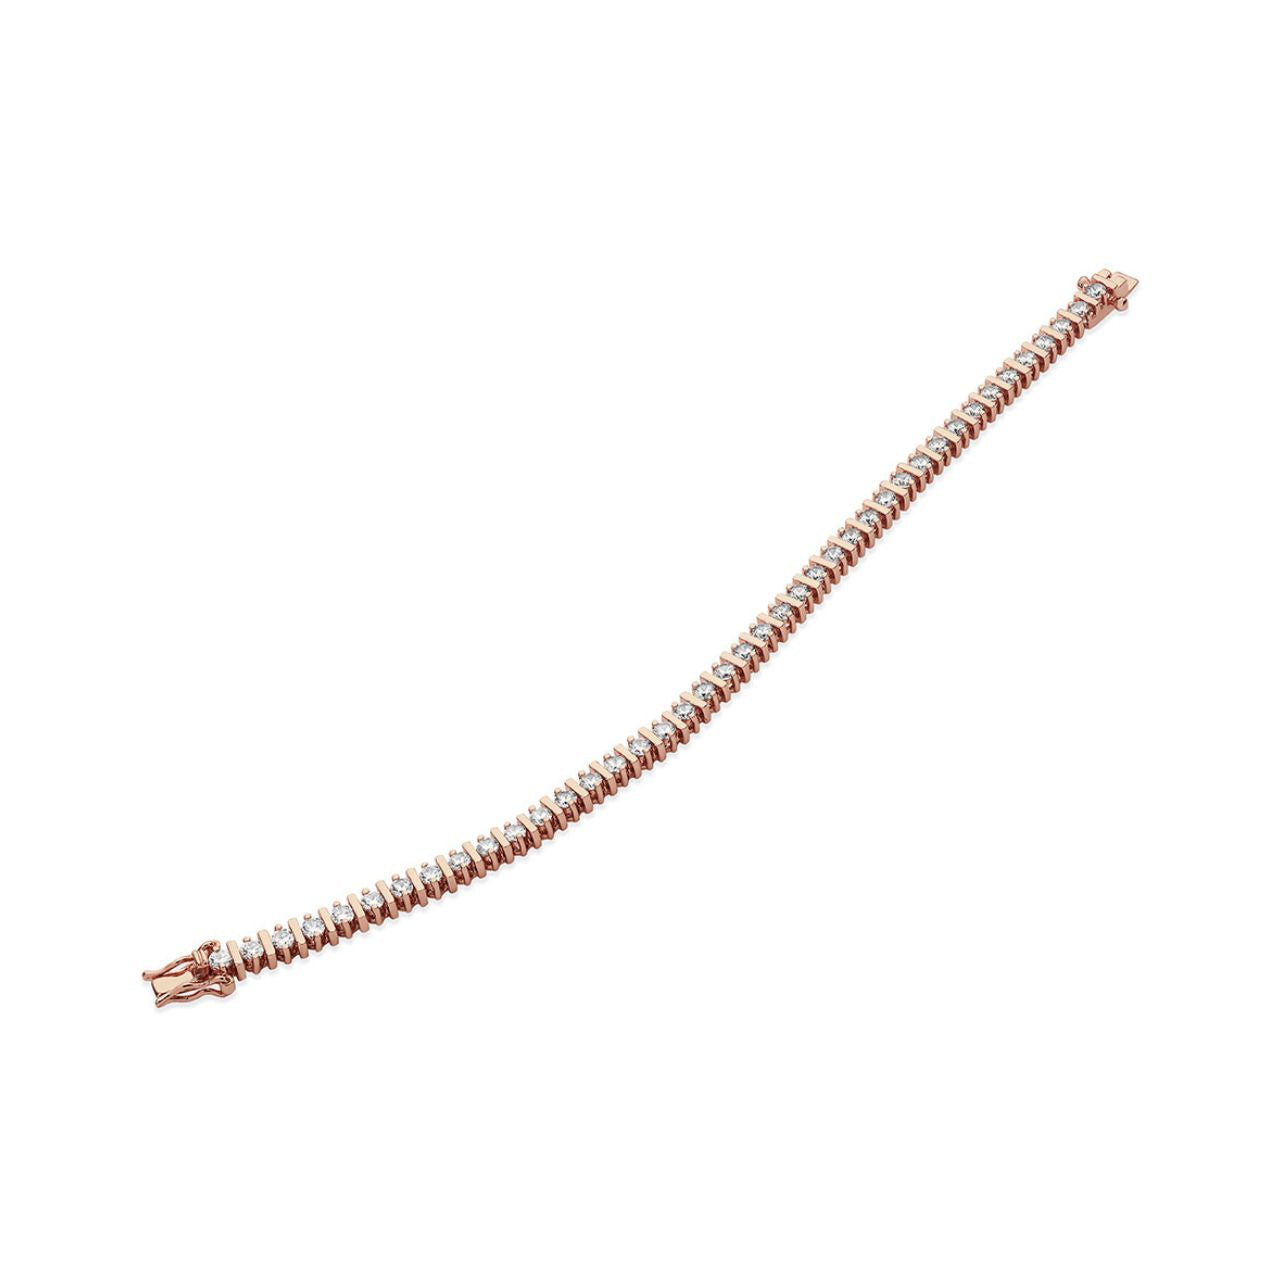 Tipperary Crystal Round Pillar Tennis Bracelet - Rose Gold  A stylish yet modern take on the traditional tennis bracelet. This simply chic style will add glamour to any look. Fashioned in sleek silver or warm rose gold, alternating two prong set crystals and smooth square links create an eye catching and unusual look perfect for any time wear.